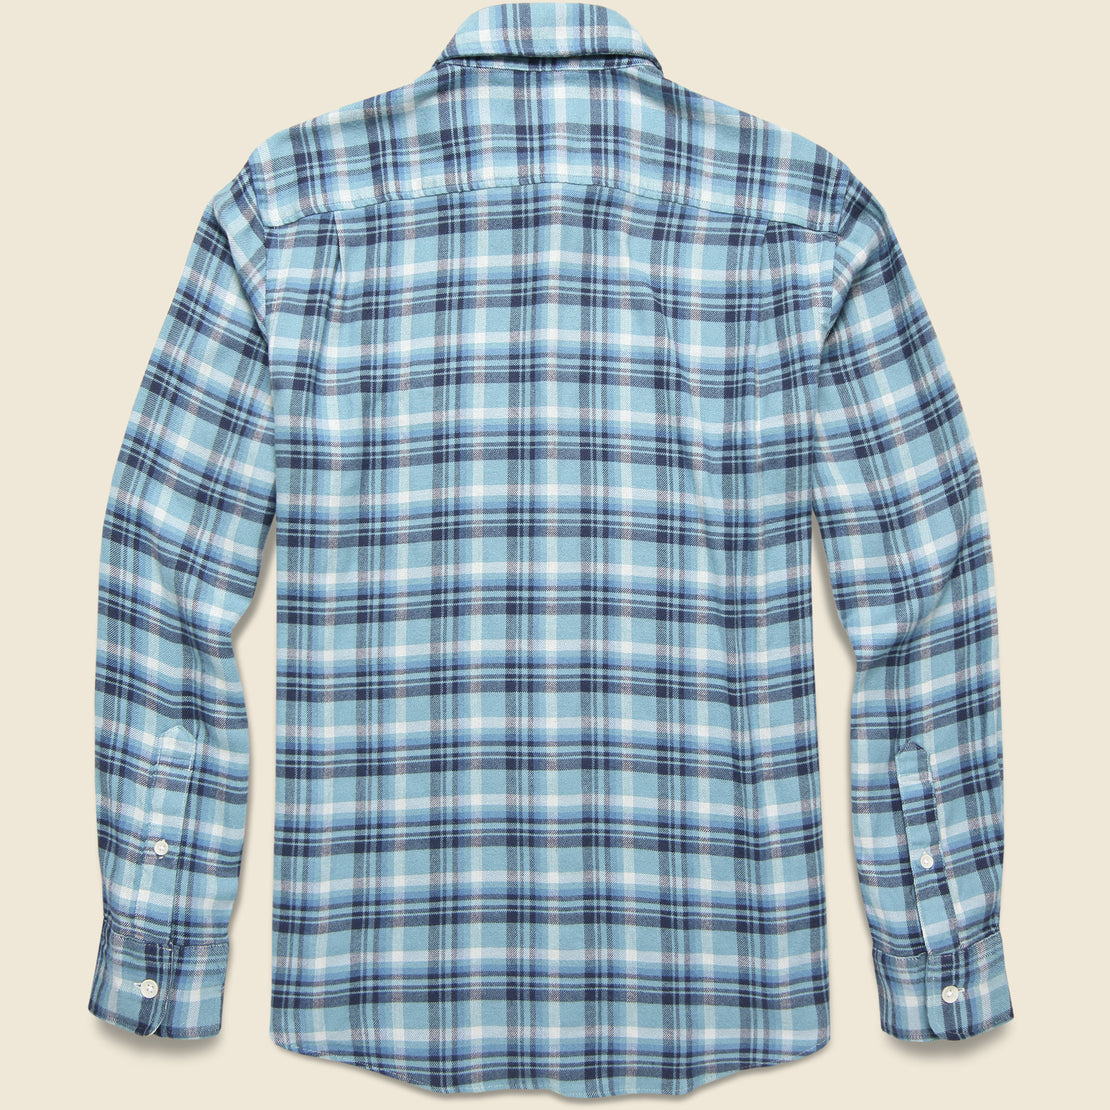 Movement Flannel - Headwater Plaid